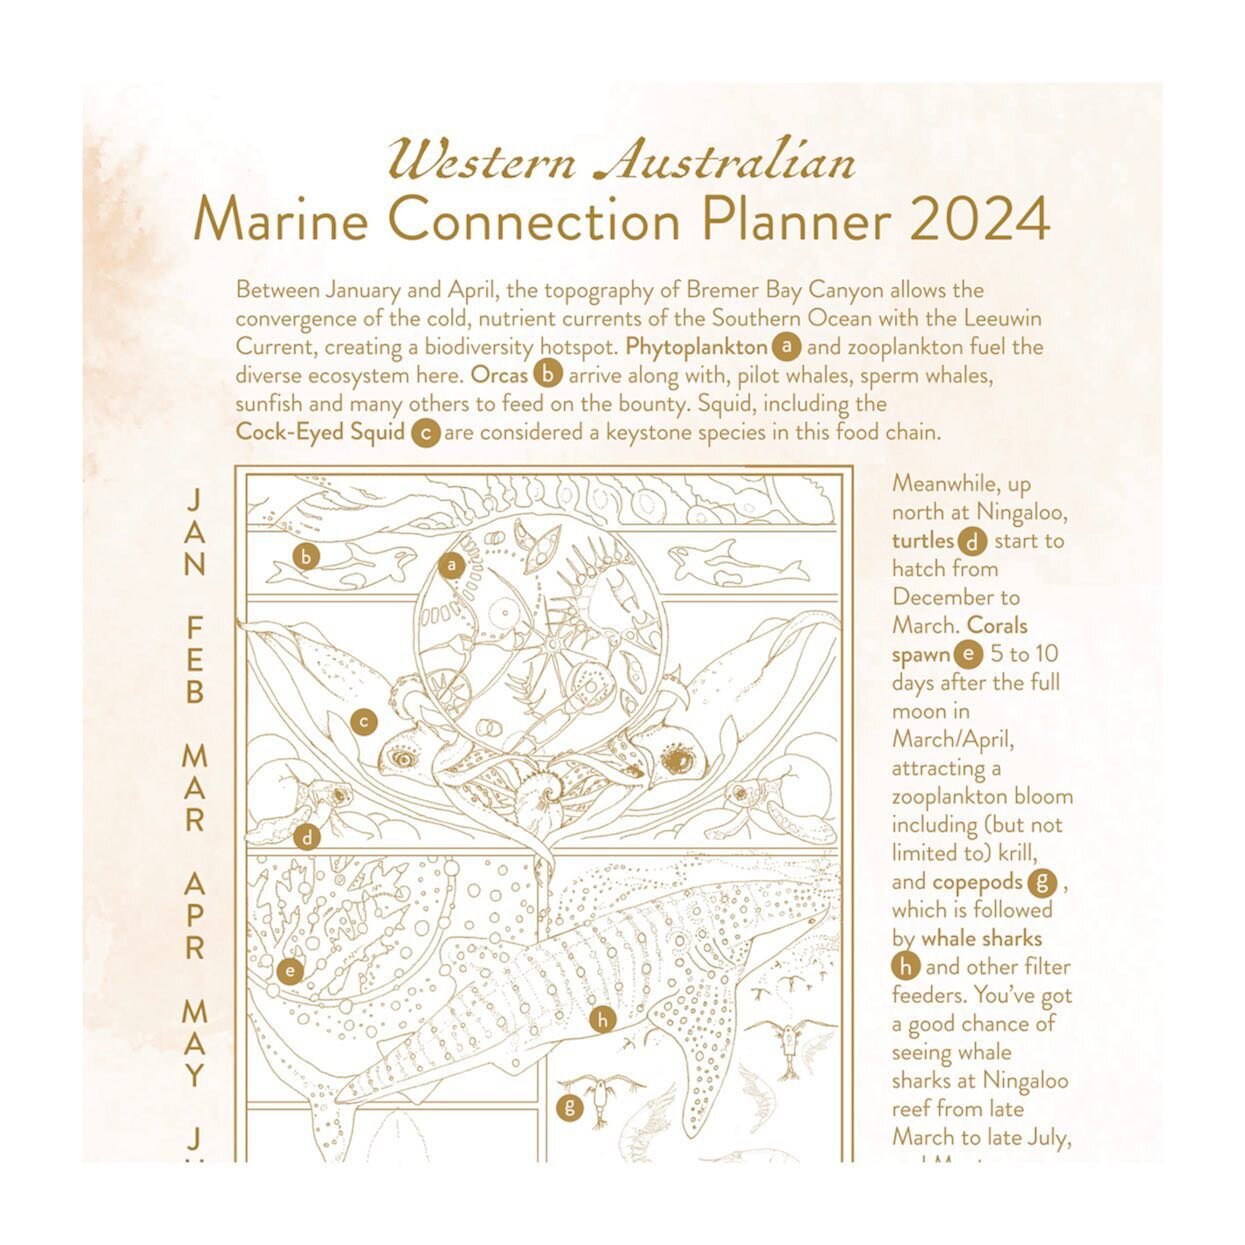 I have been working with super talented artist/marine biologist @sam.adams.art to produce this very unique West AUSTRALIAN Marine Connection Planner. 

With a beautifully hand-drawn panel with illustrations of our WA marine creatures and their moveme